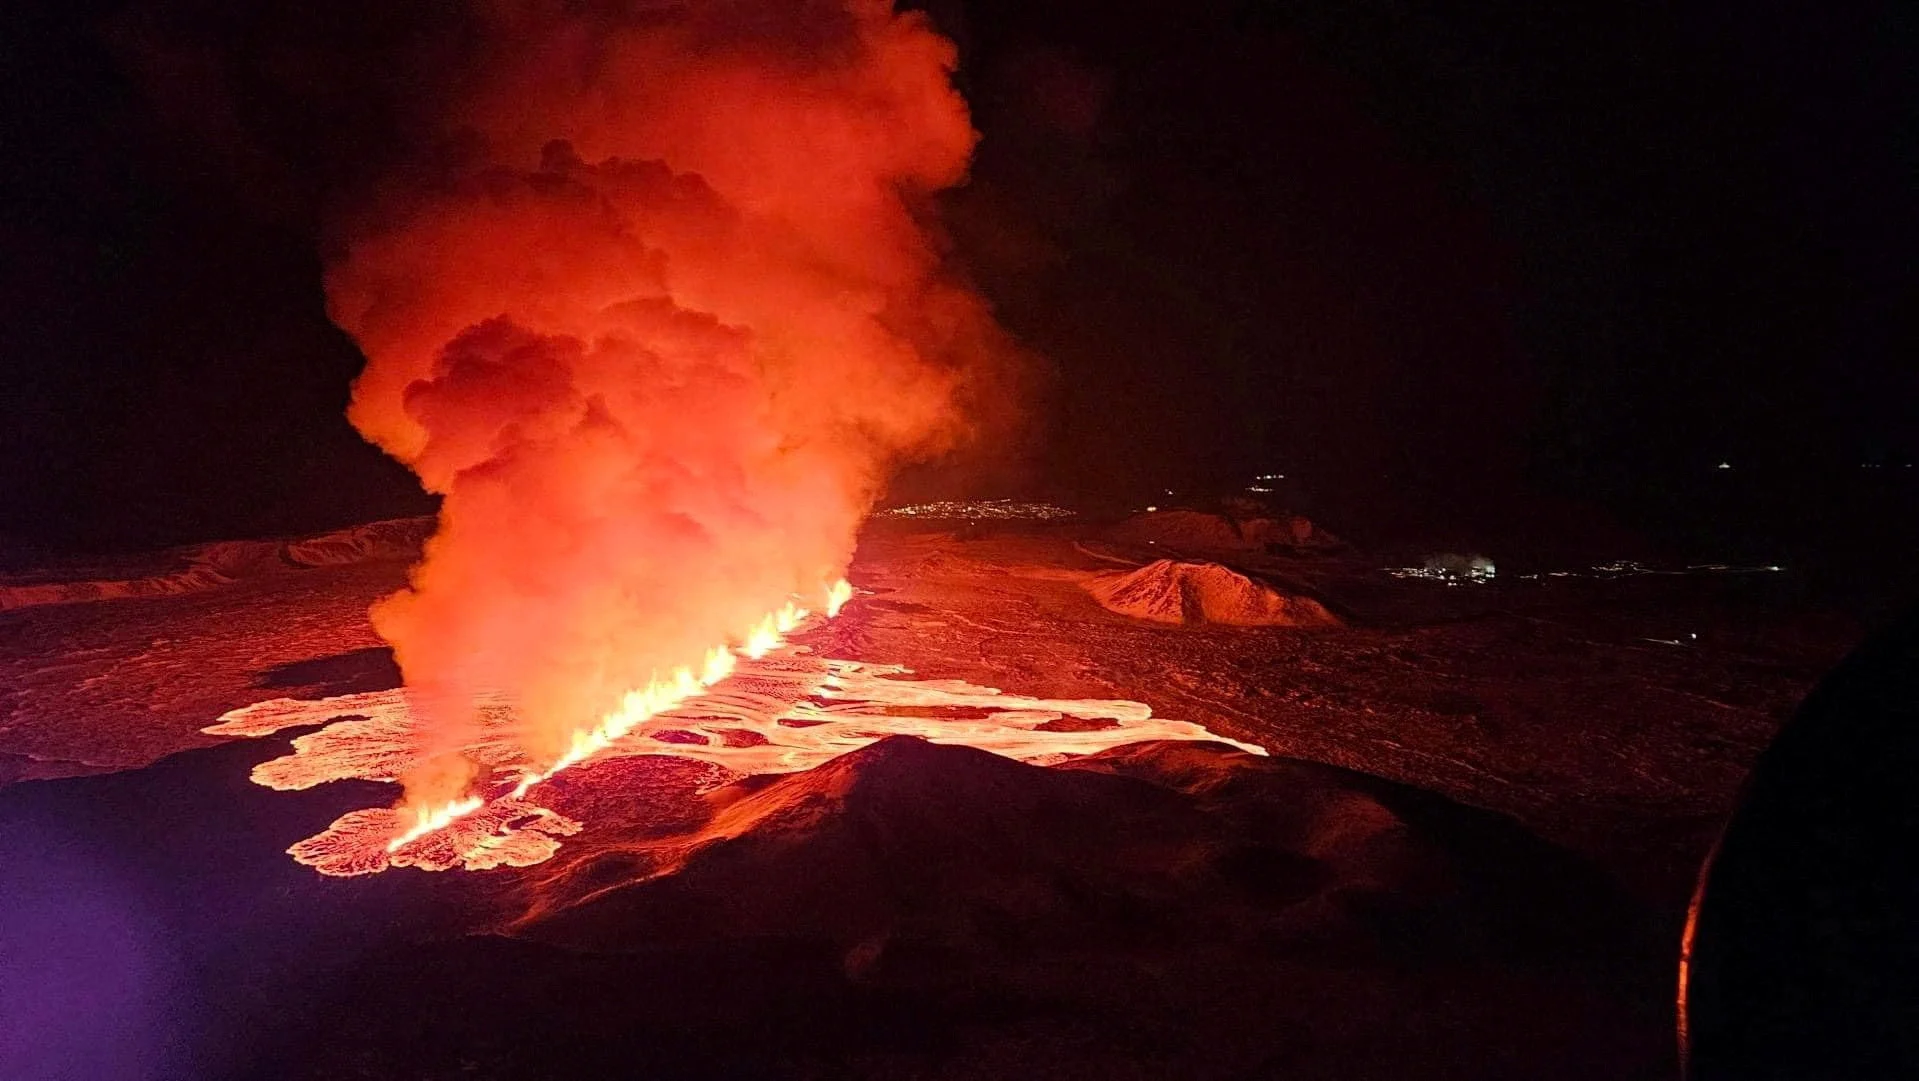 Reuters: A volcano spews lava and smoke as it erupts on Reykjanes Peninsula, Iceland, February 8, 2024. Iceland Civil Protection/Handout via REUTERS